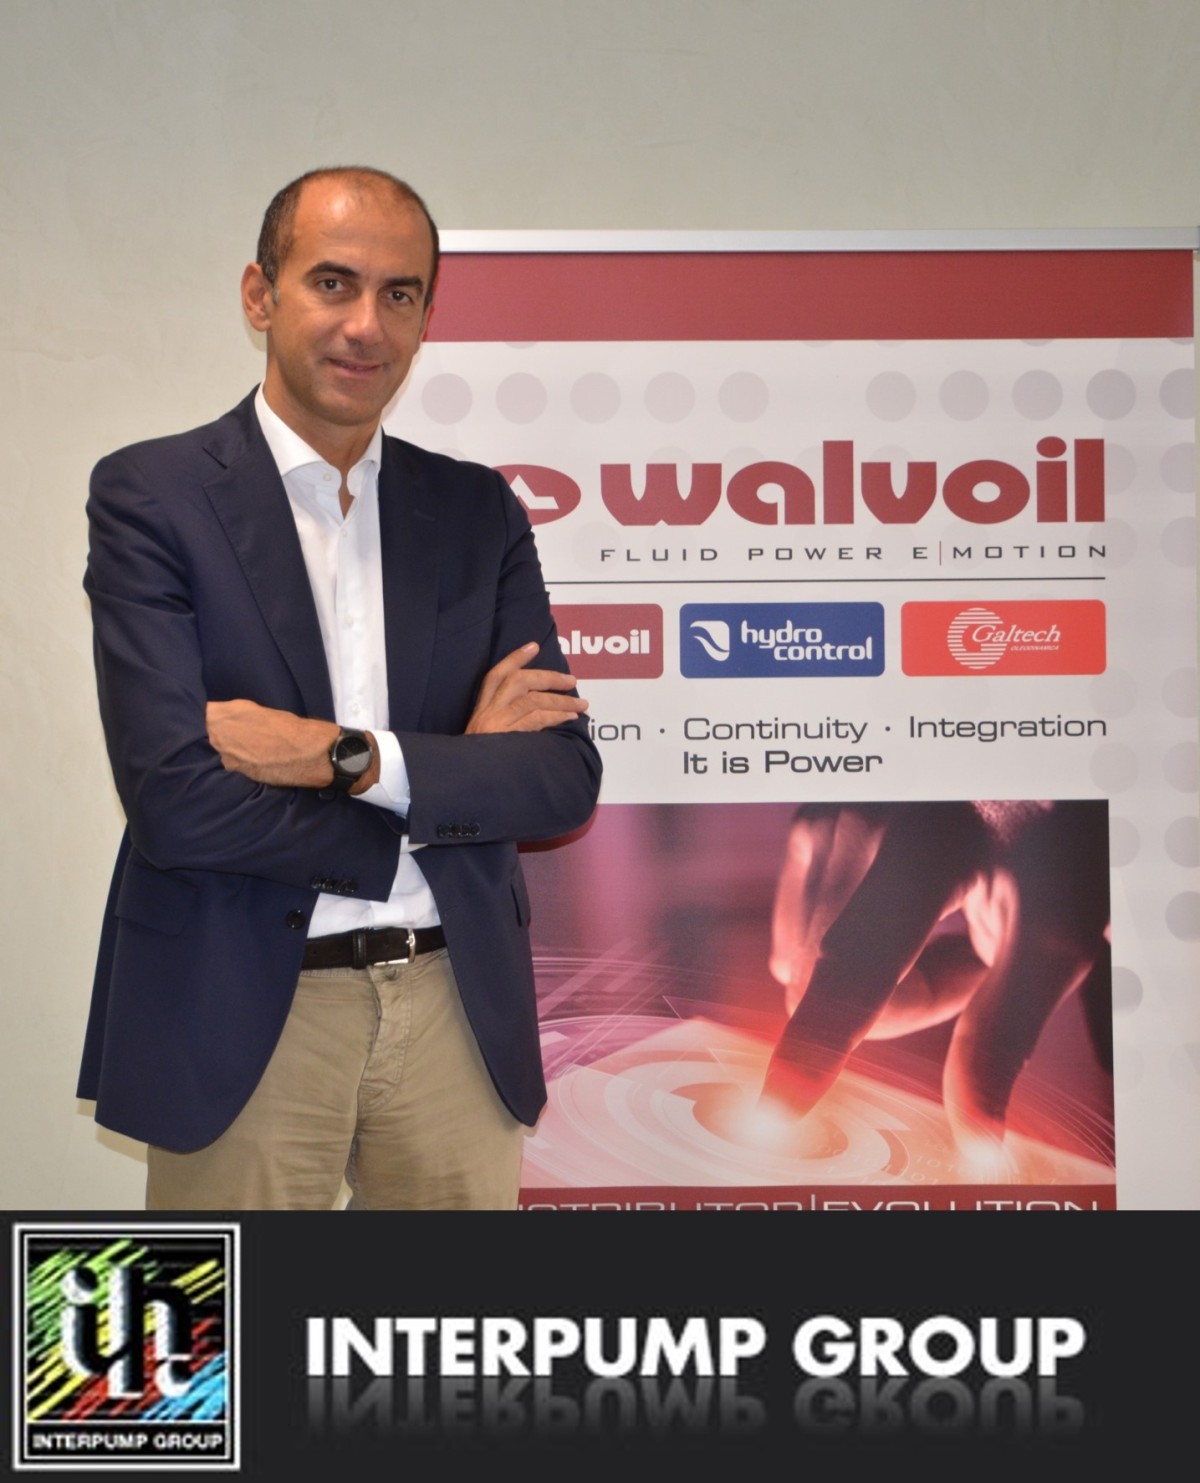 Walvoil's president and CEO appointed Chief Executive Officer of Interpump Group